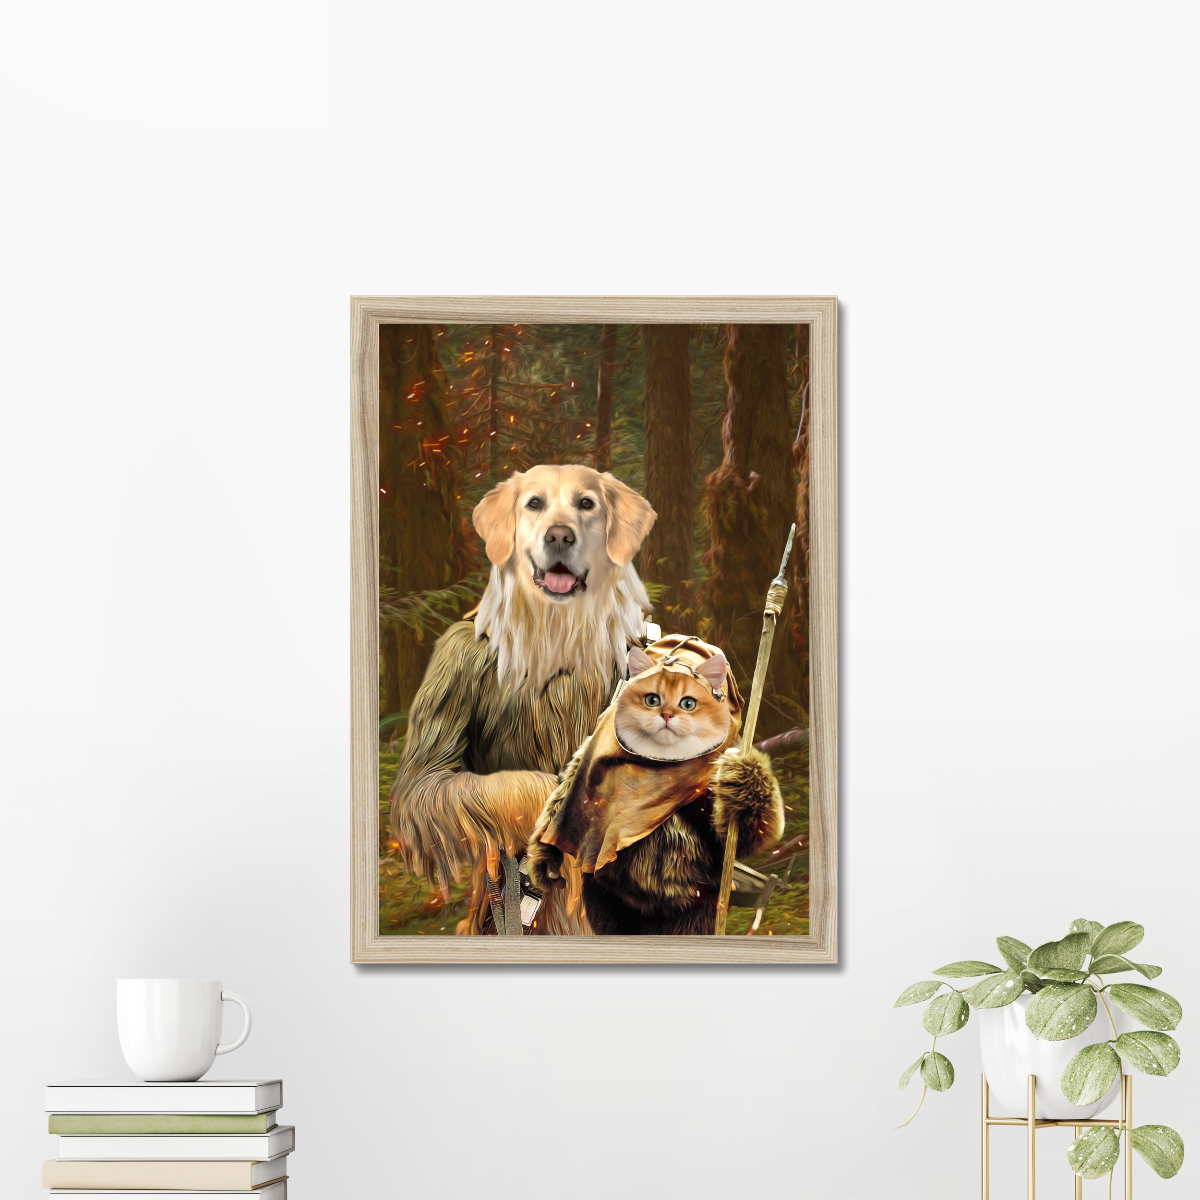 Pawbecca & Ewok (Star Wars Inspired): Custom Pet Portrait - Paw & Glory, paw and glory, in home pet photography, pet photo clothing, professional pet photos, dog canvas art, for pet portraits, admiral pet portrait, pet portraits